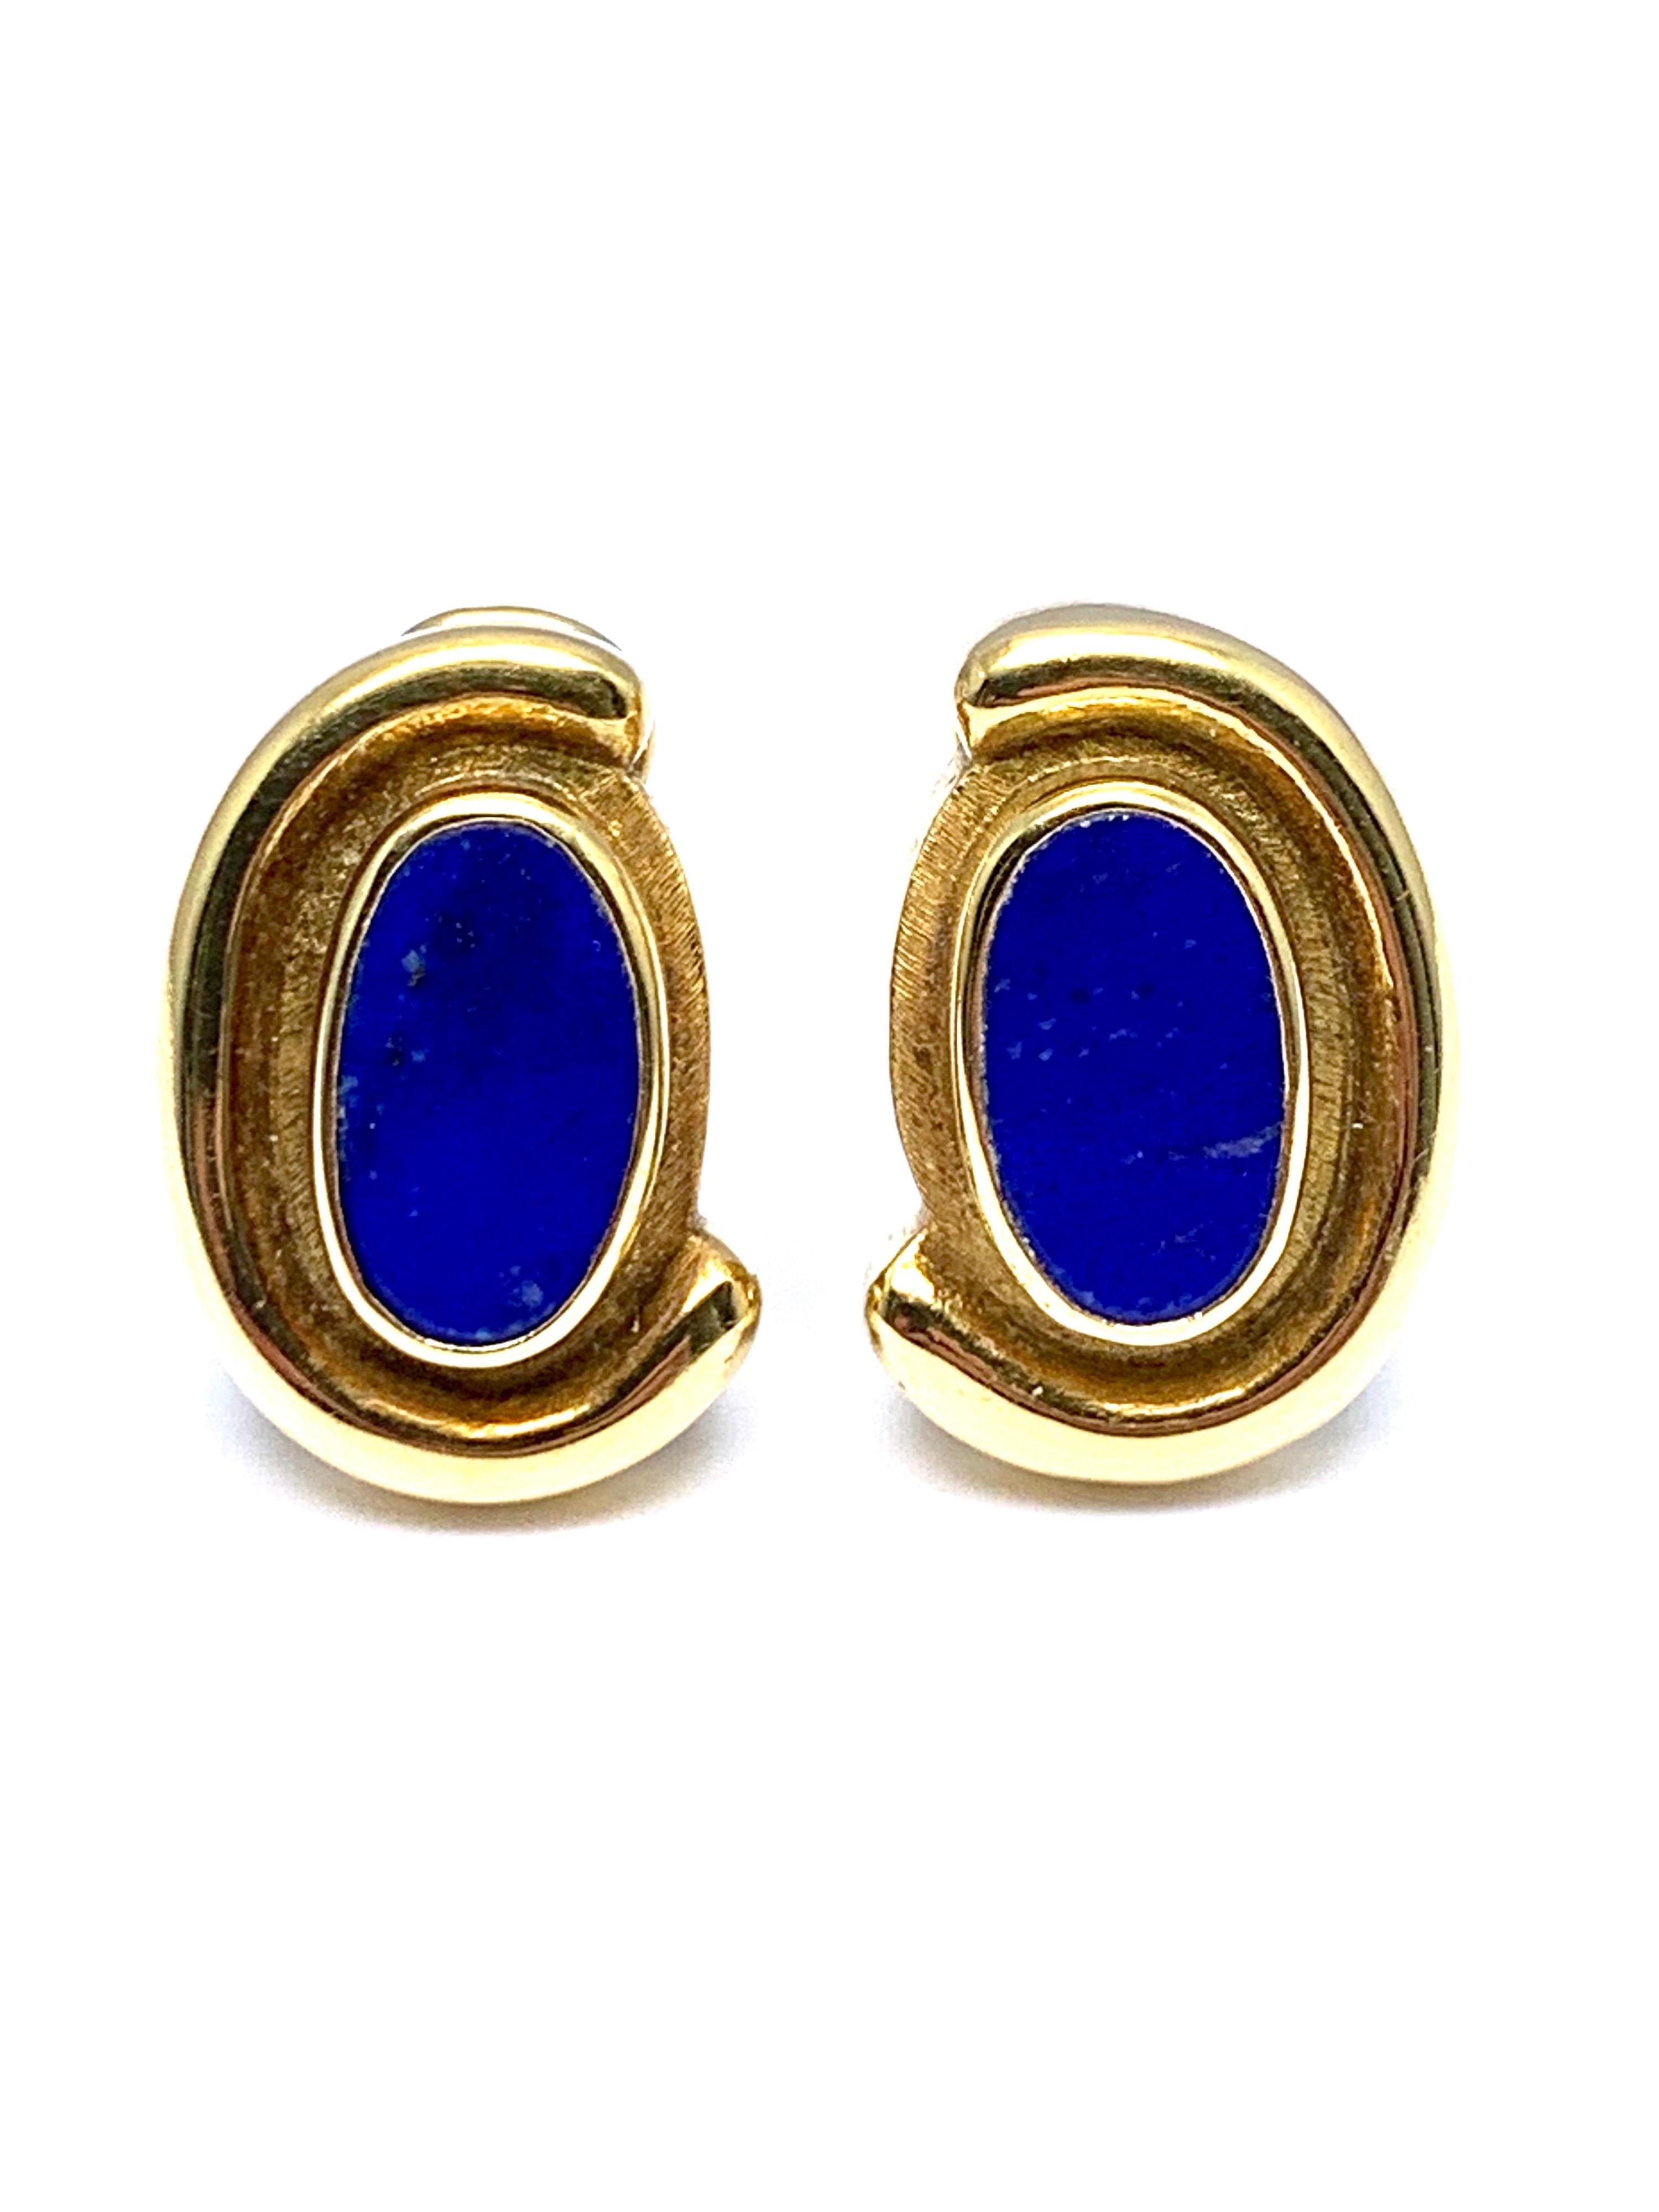 A beautiful Lapis Lazuli earrings designed by Burle Marx. The flat oval Lapis Lazuli is bezel set in an 18 karat yellow gold abstarct design earrings. The backs of the earrings are signed 